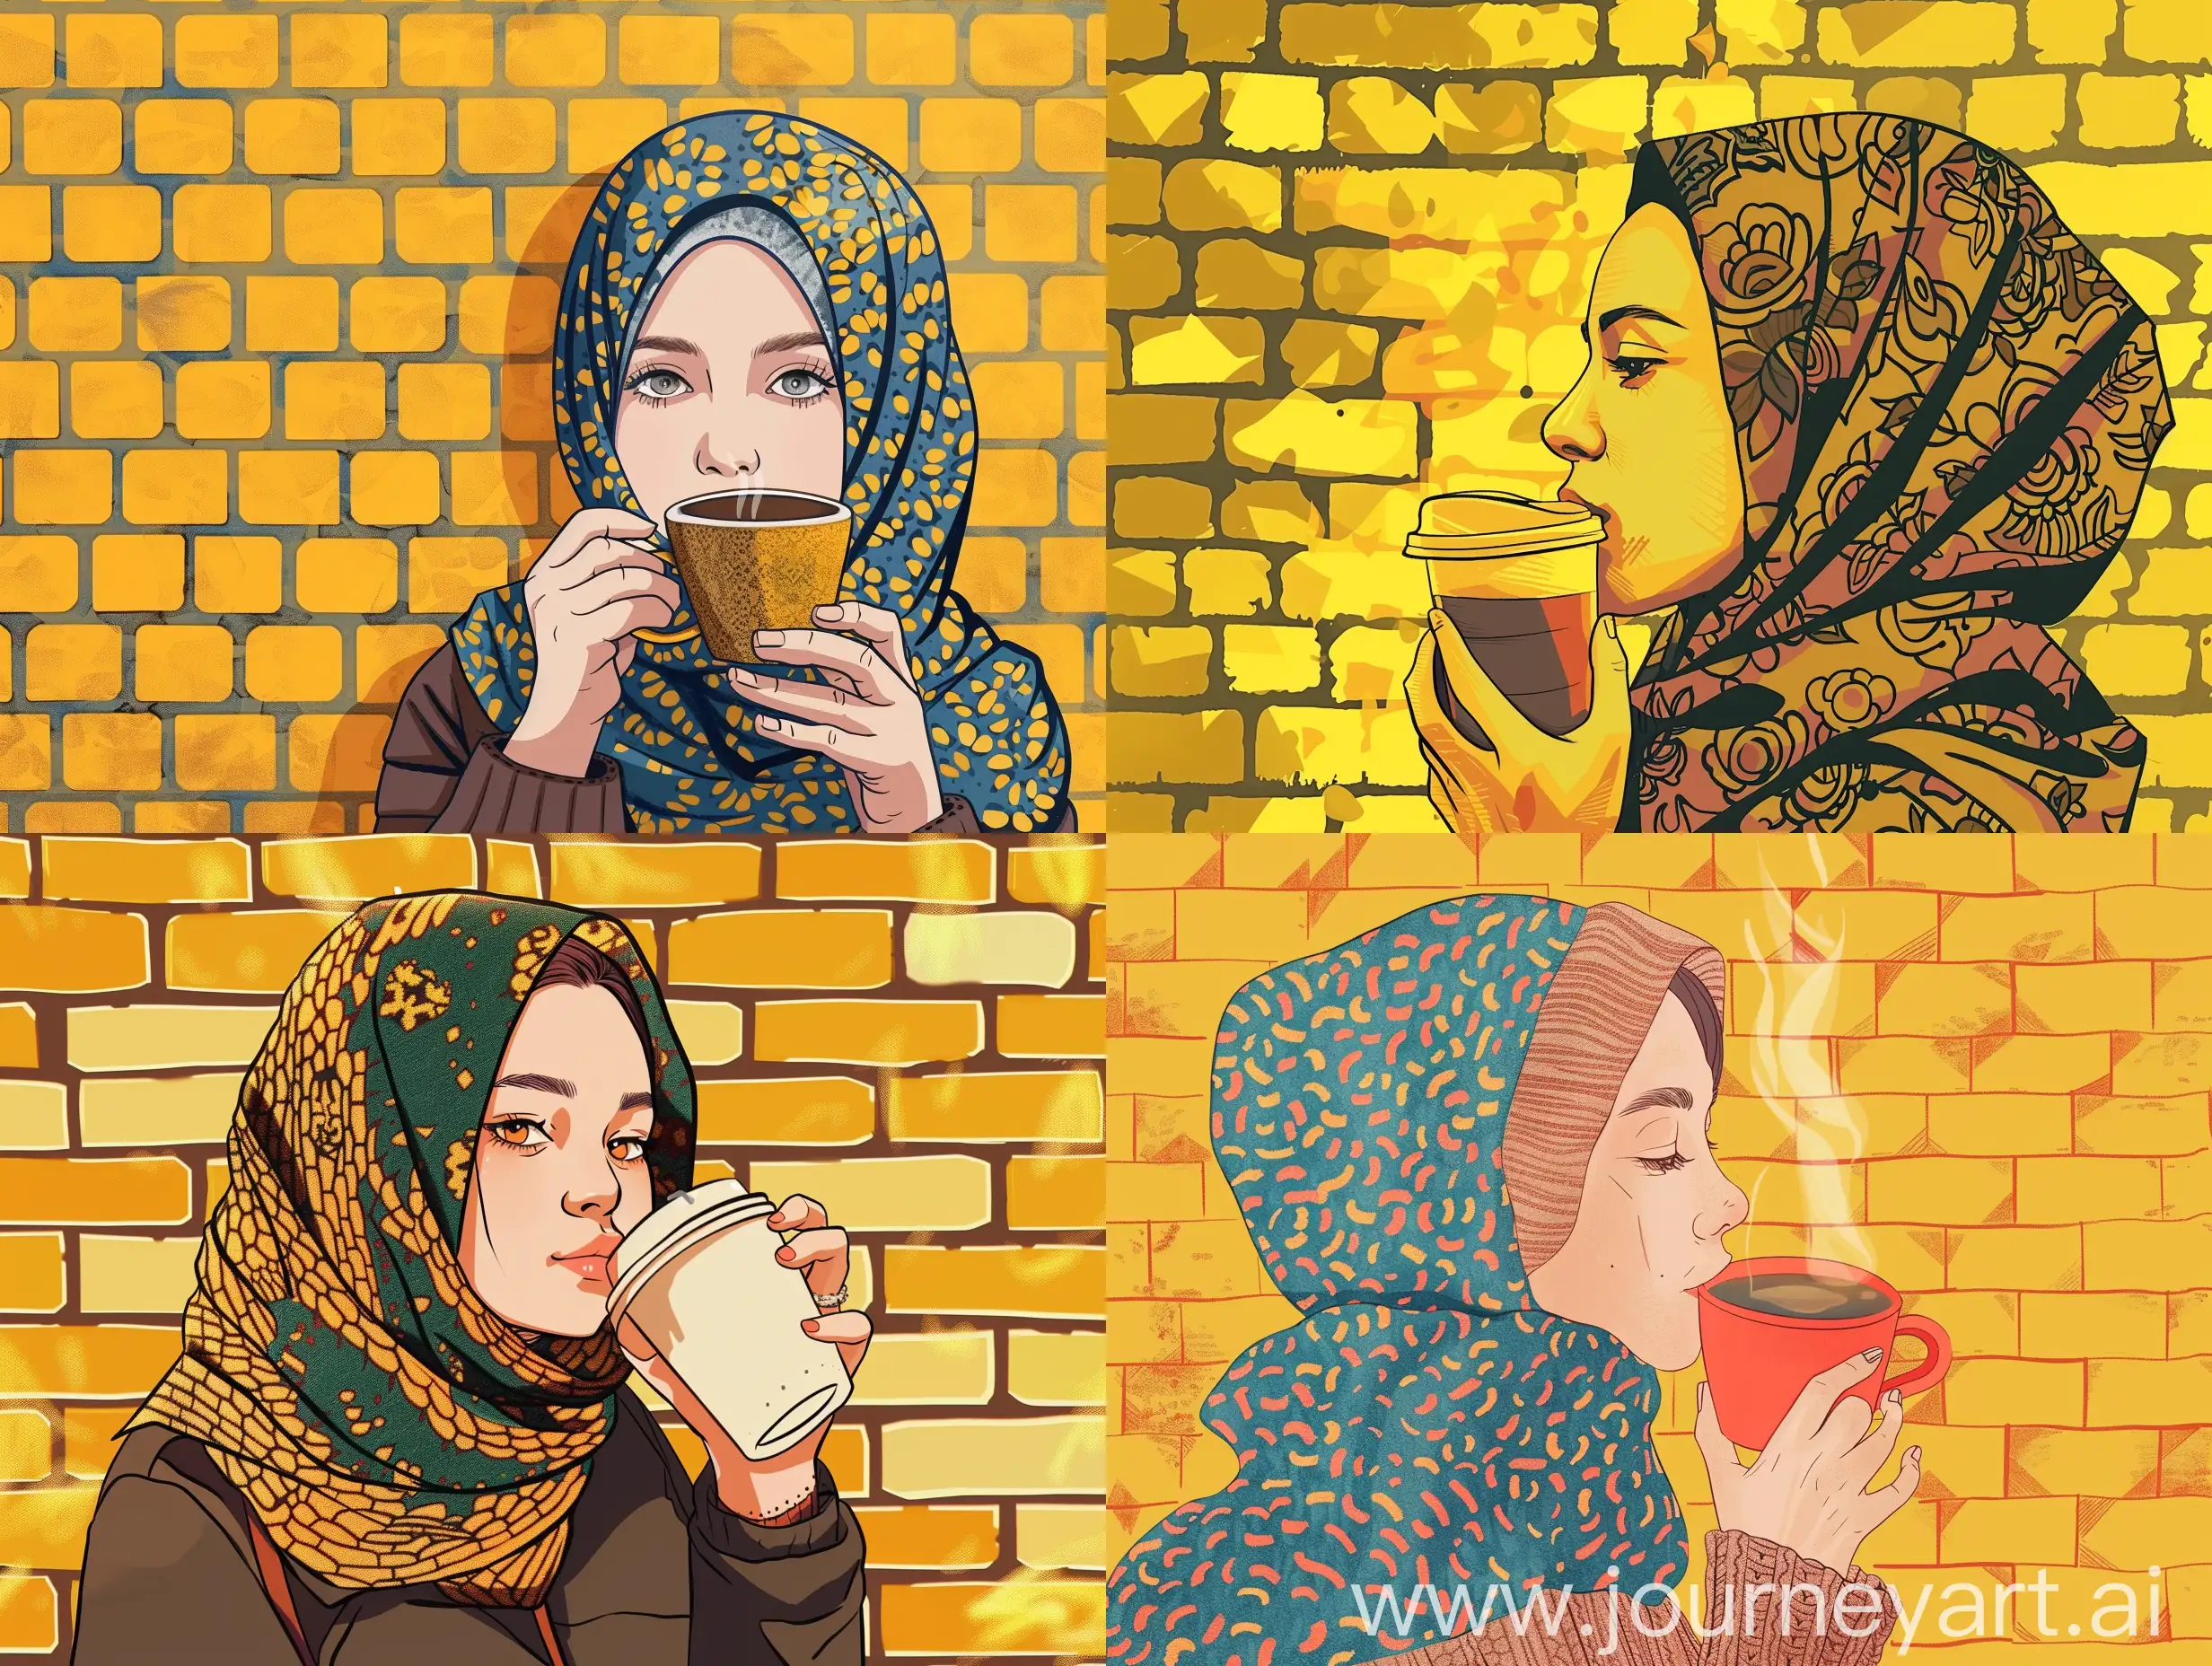 Profile photo of a girl with a headscarf drinking coffee with a background of yellow bricks